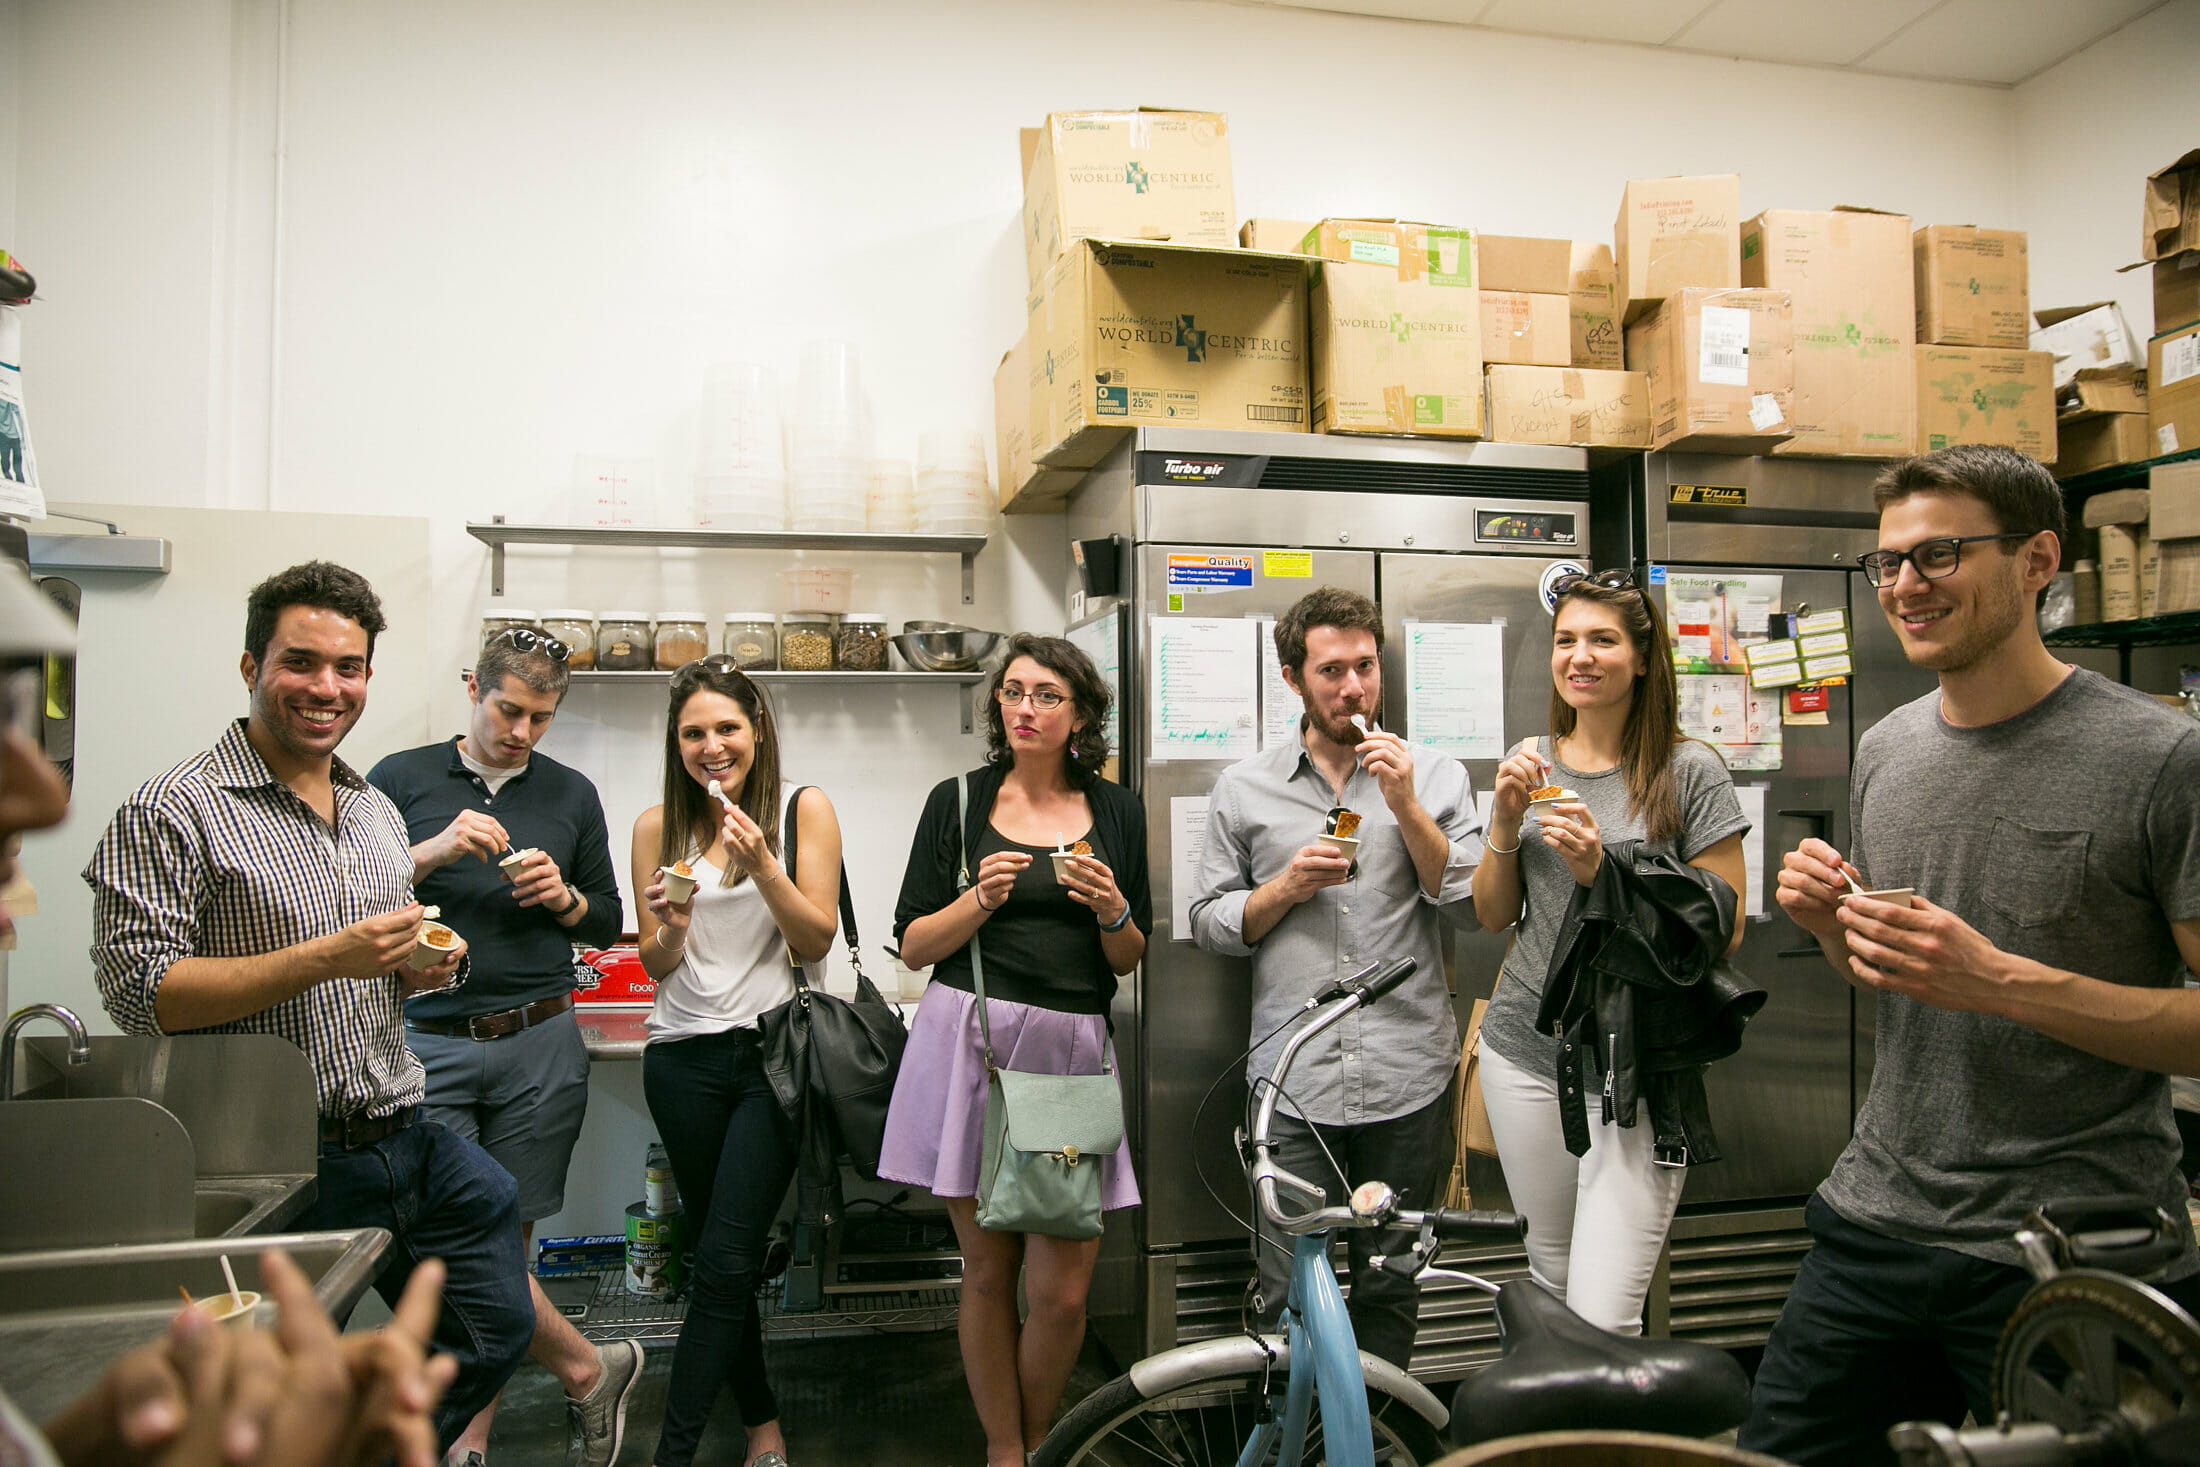 take a food tour-5 Los Angeles Team Building Activities Your Coworkers Won't Hate